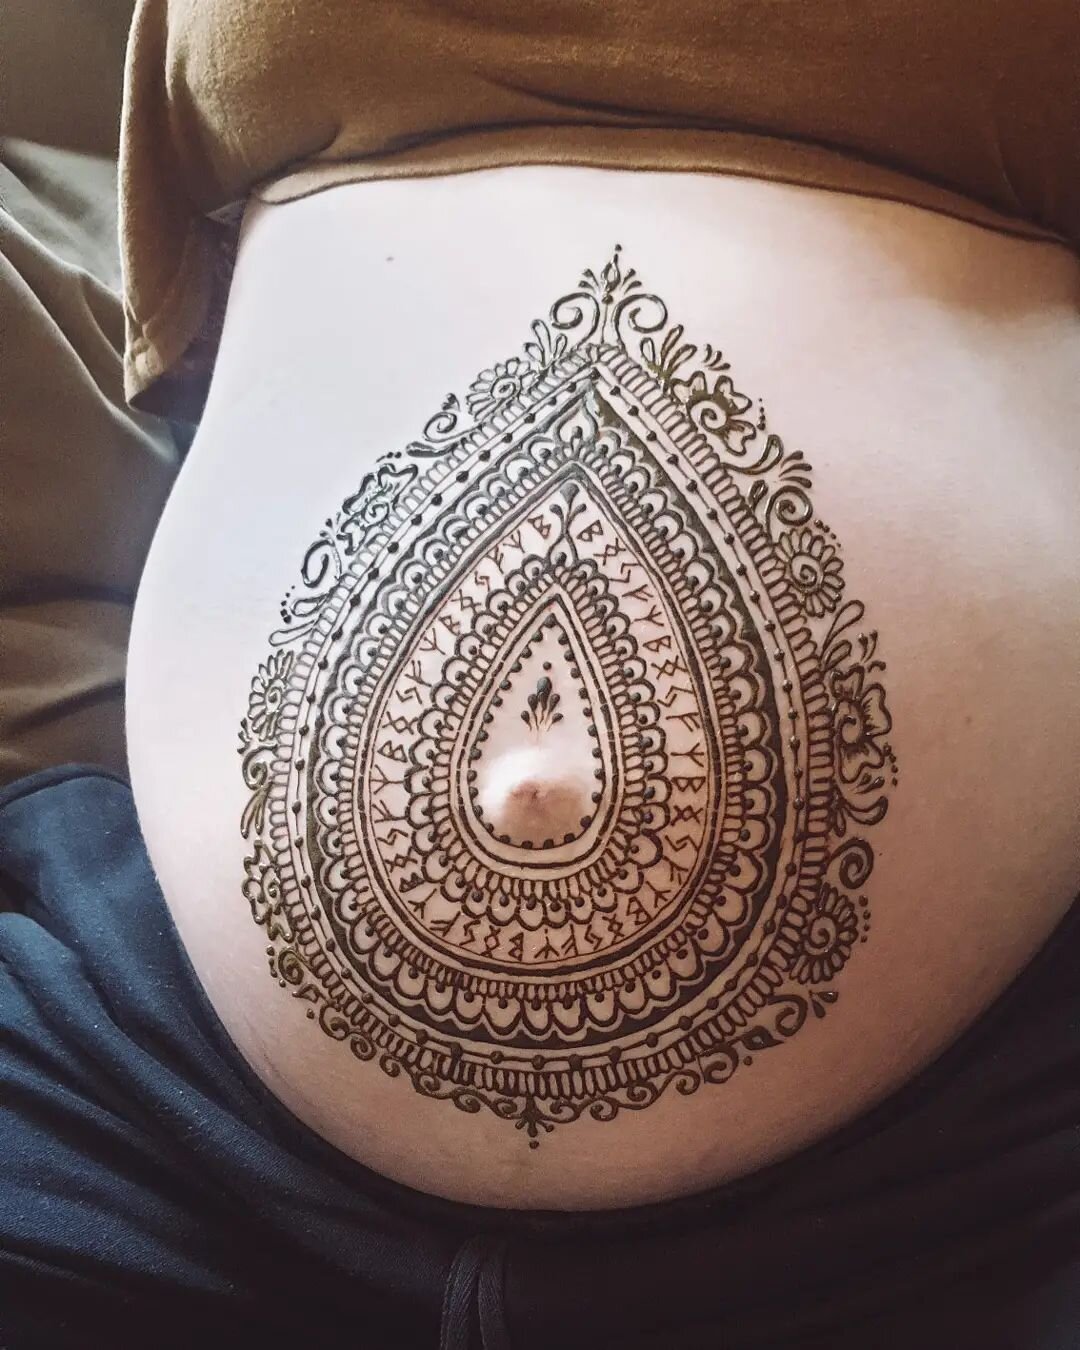 And the henna season has kicked off with my first appointment tonight! This gorgeous baby bump design includes viking rune symbols on the client's request. The symbols she chose represent fertility, protection, new beginnings, growth just to name a f